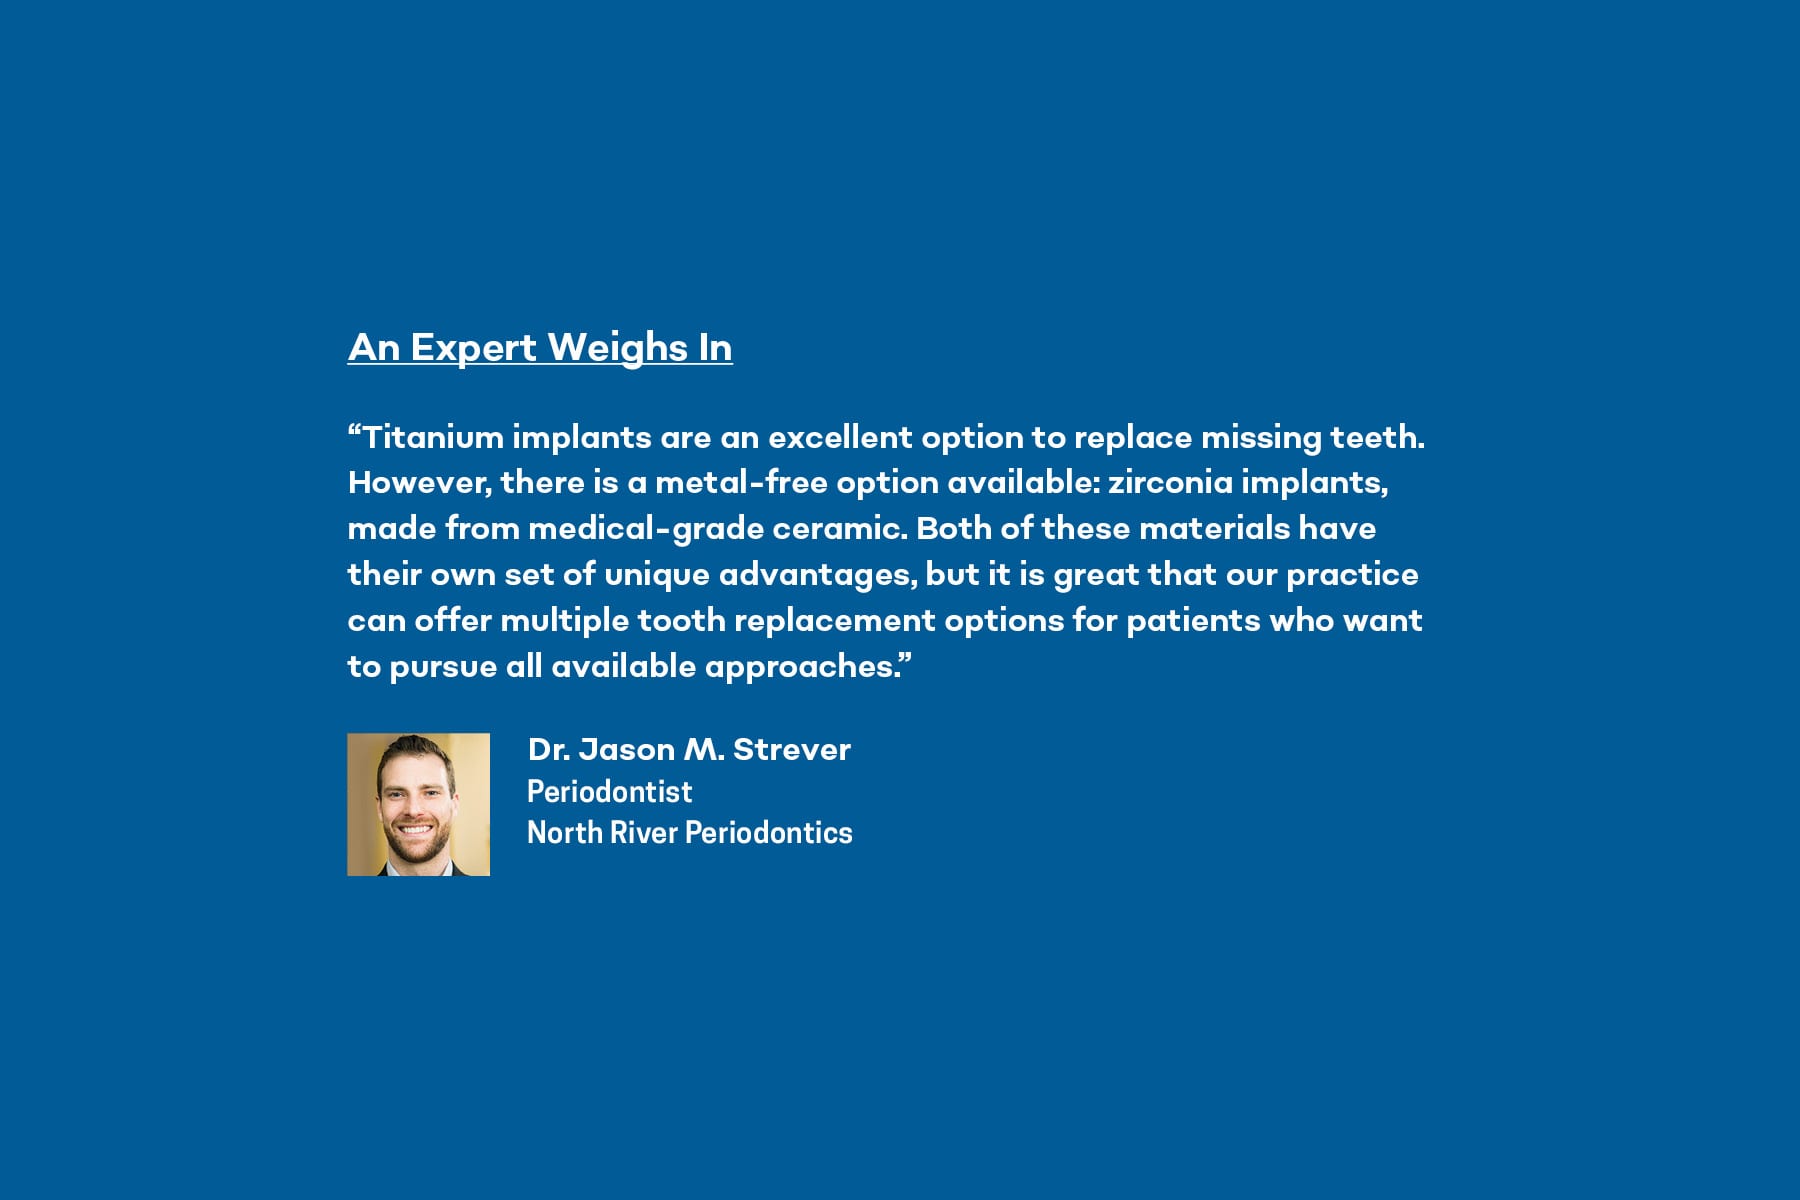 Dr. Jason M. Strever shares his expert opinion on zirconia dental implants